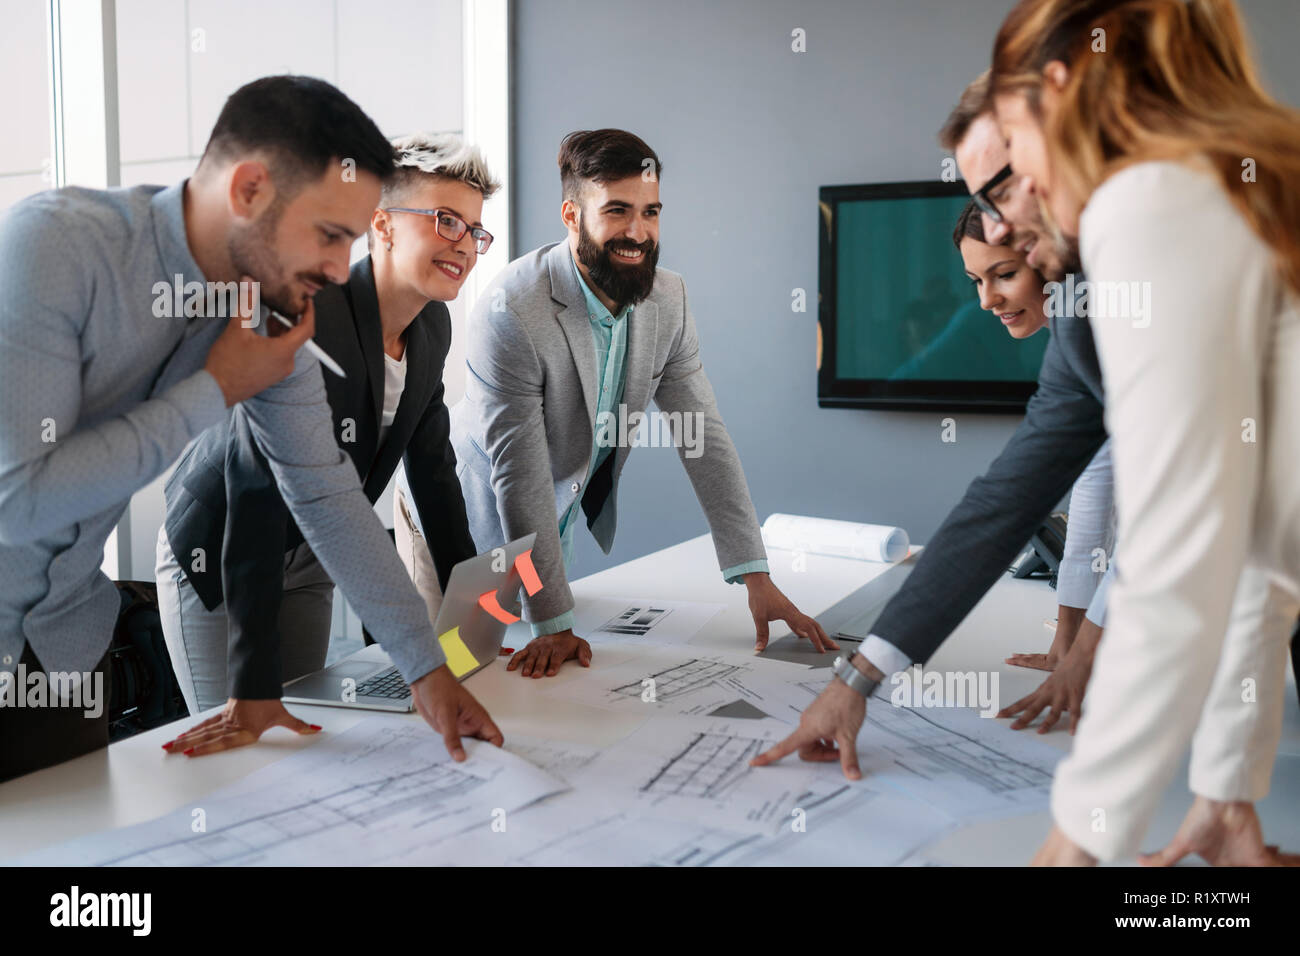 Group of architects working on new project Stock Photo